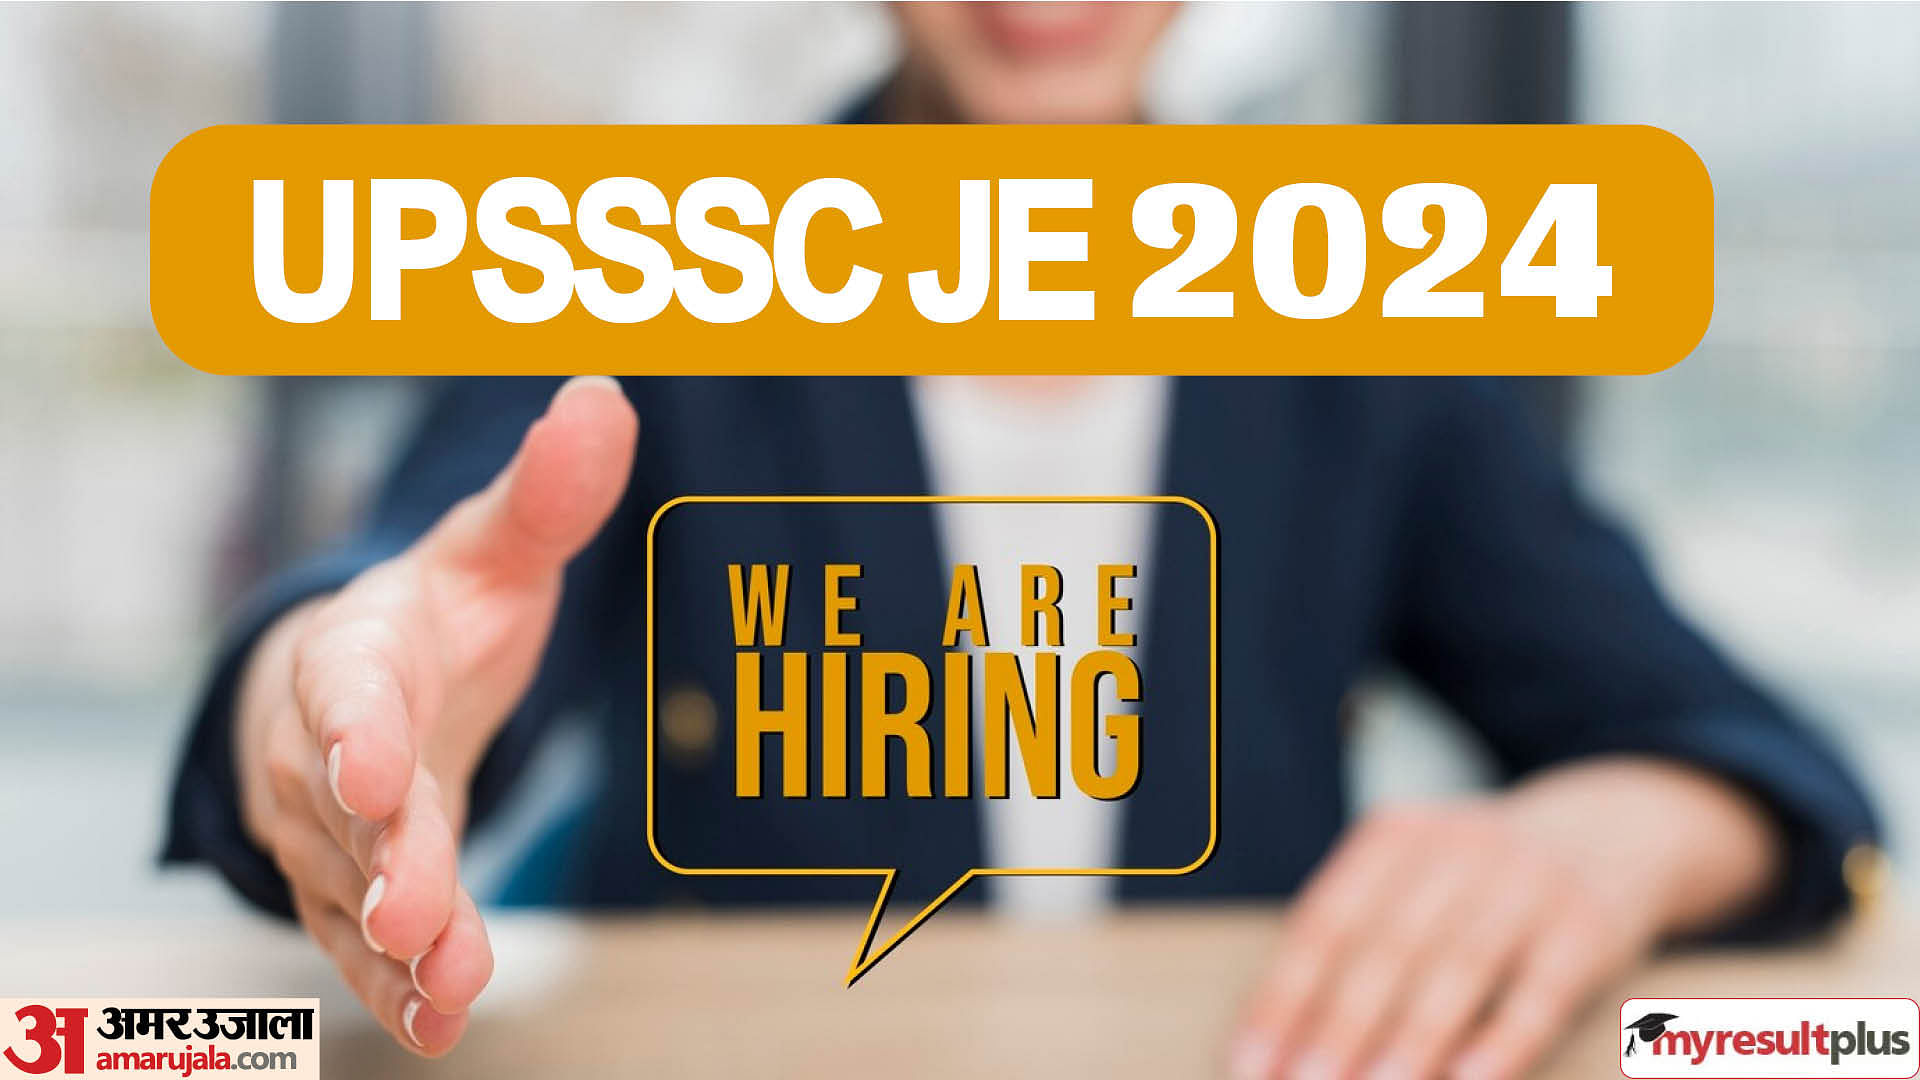 UPSSSC JE Civil Mains 2024: Last date for applying extended till 28 June, Vacancies revised; Read here